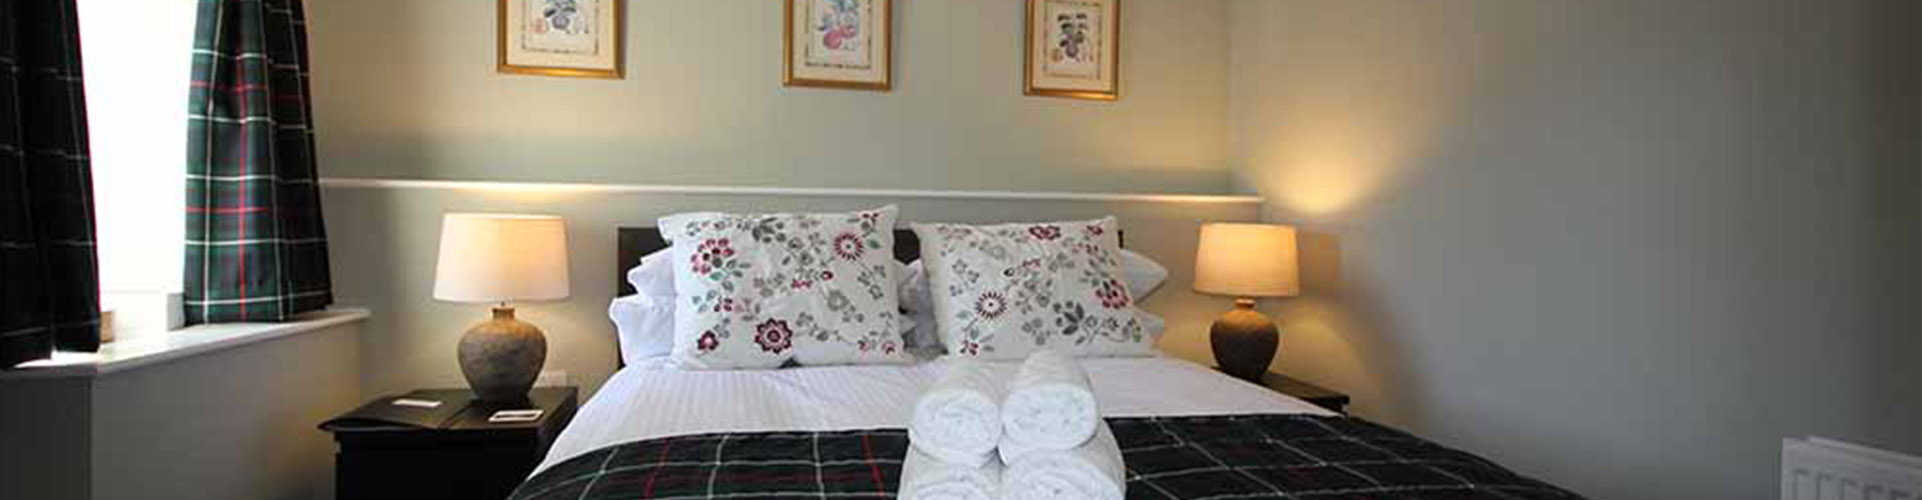 A double bedroom in Tarbert House Bed and Breakfast on Islay